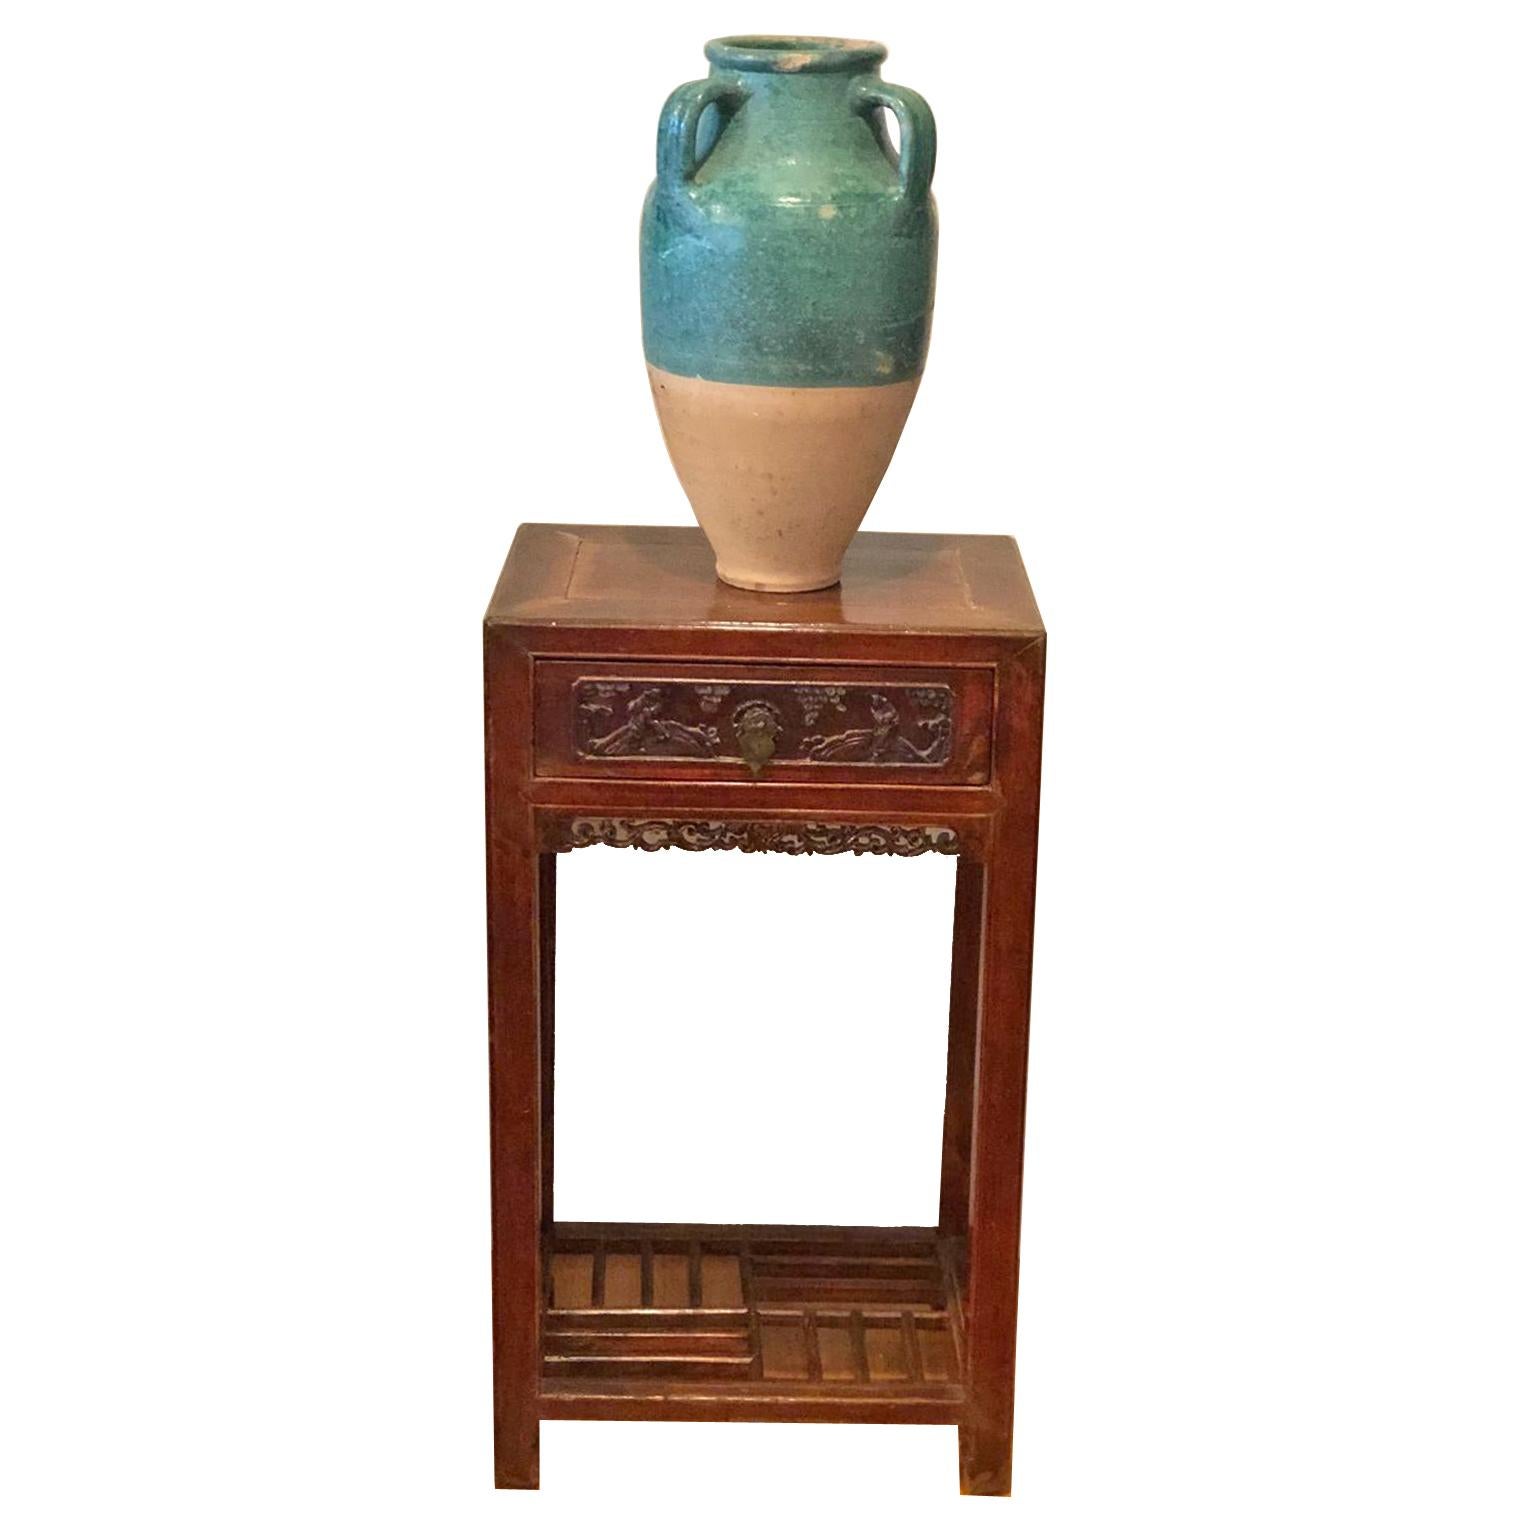 A very beautiful terracotta pot or urn with teal overglaze and three handles. France, circa 1800s. This urn is in very good condition and features a very lovely patina, acquired over its long history.

Measurements: 9